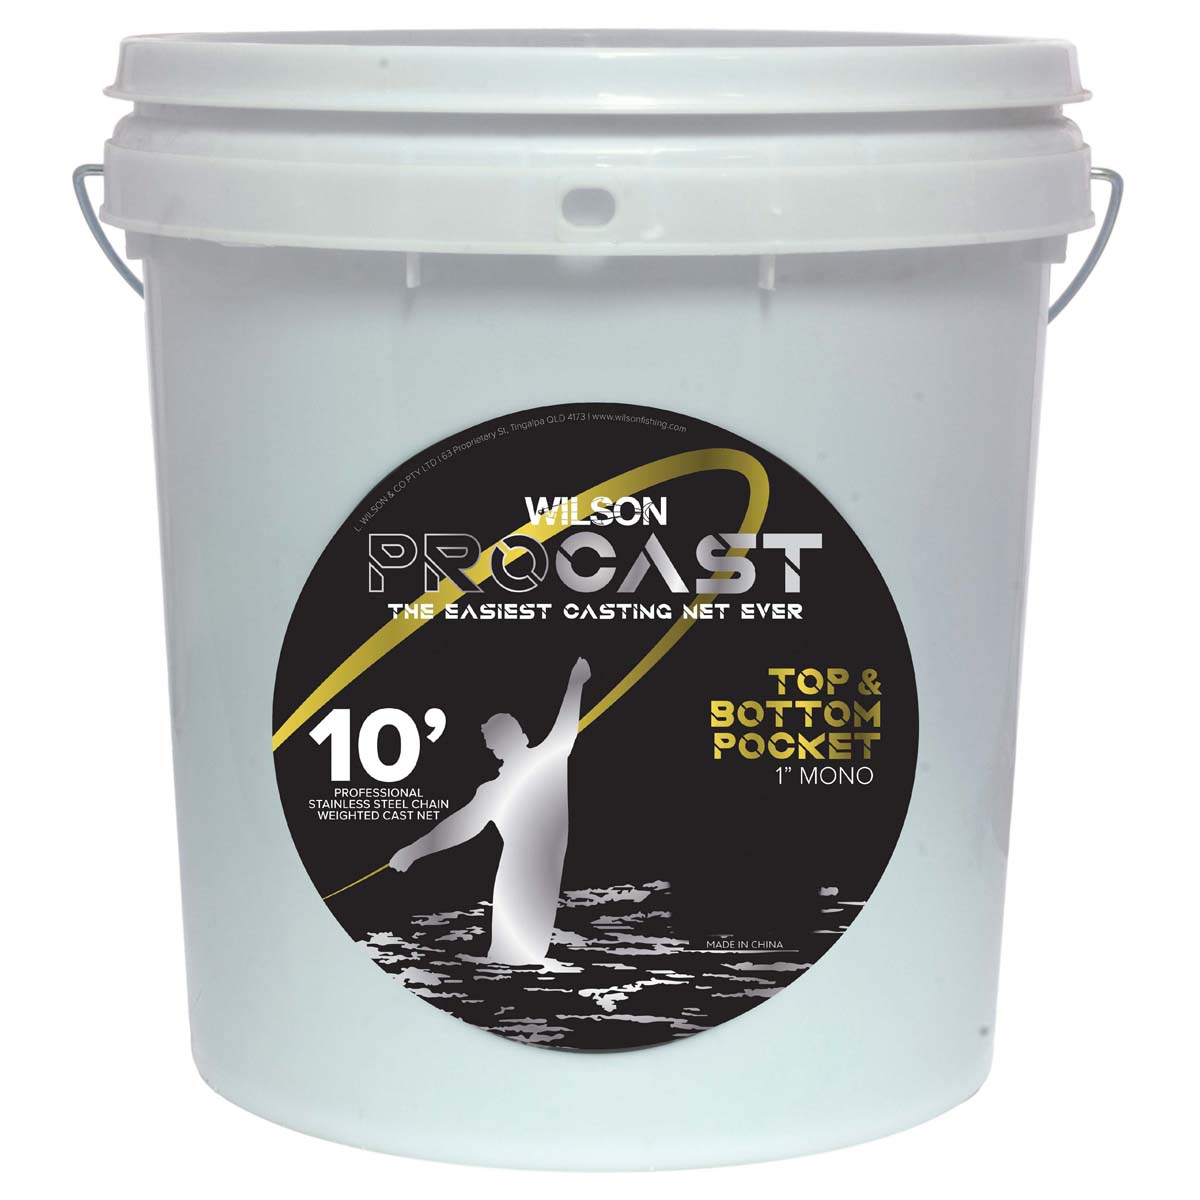 Wilson Pro Cast Top and Bottom Cast Net 10ft 1in